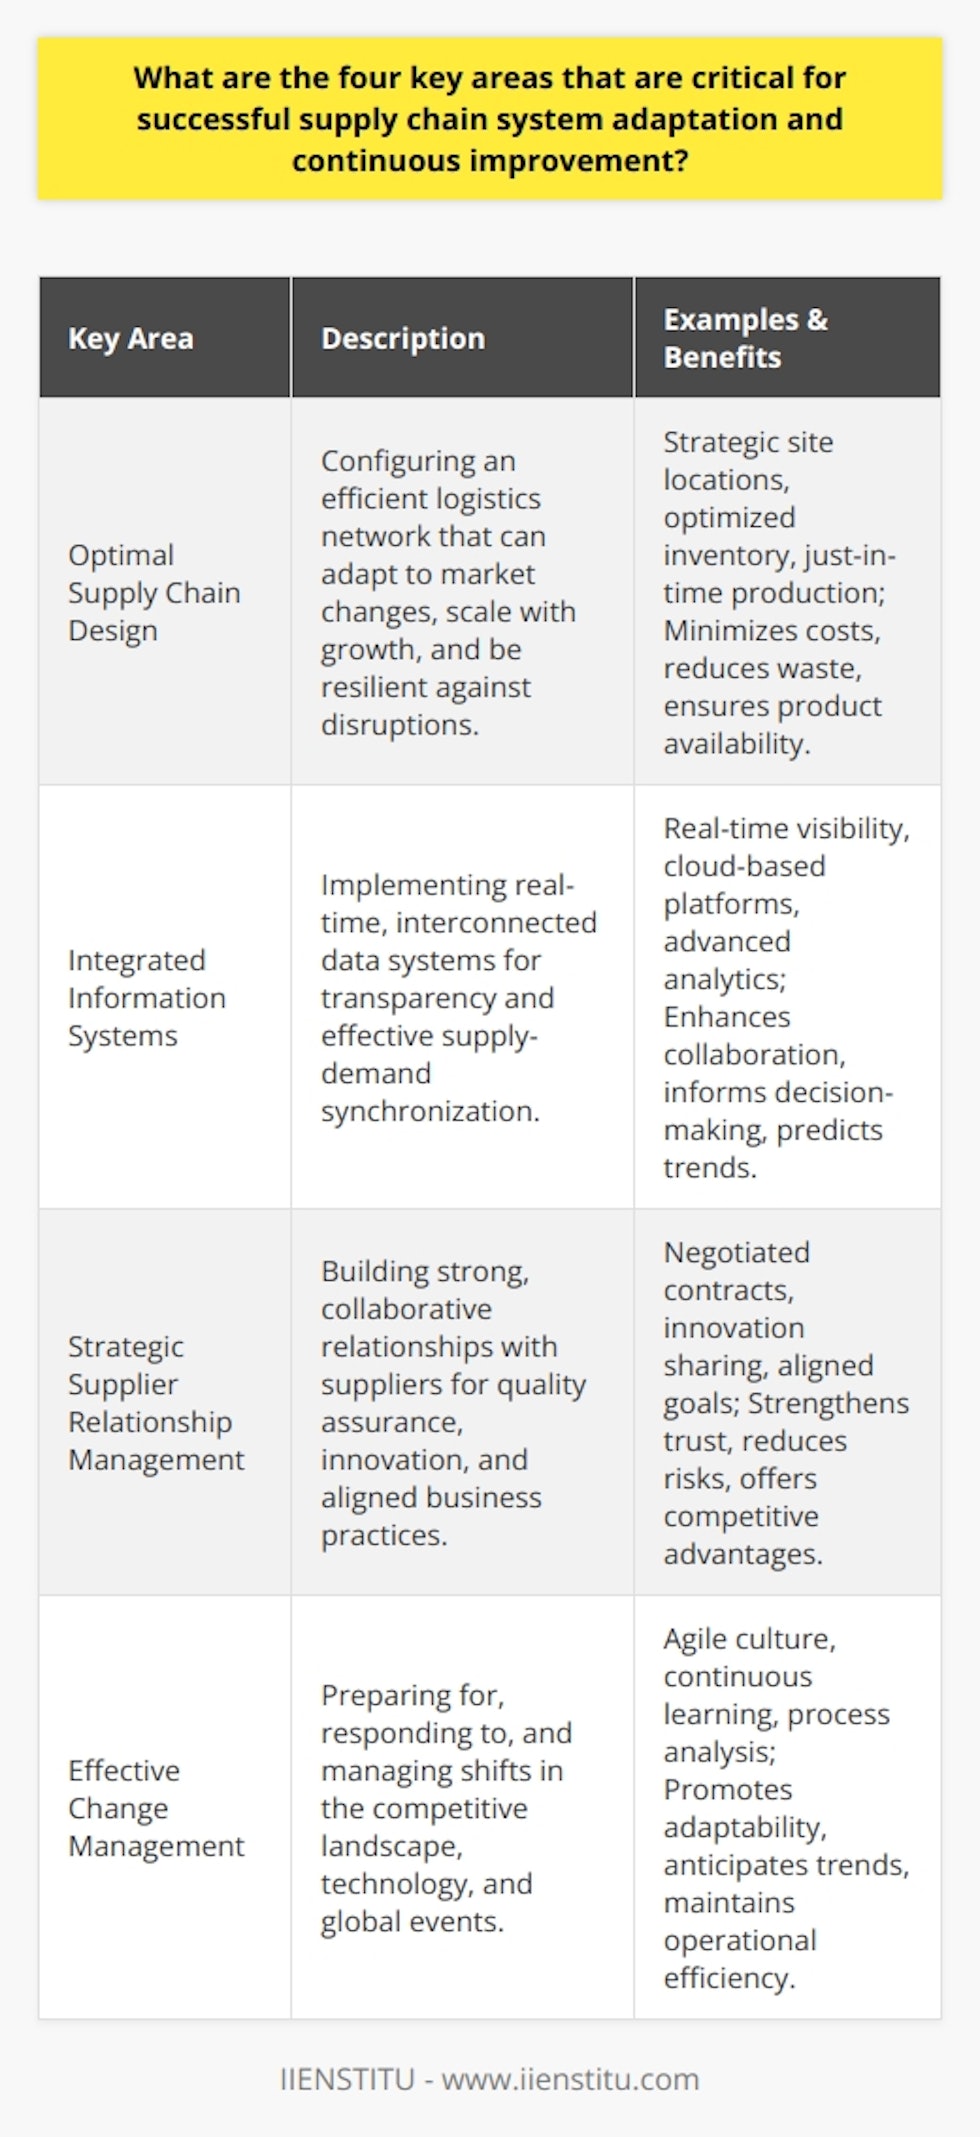 In the dynamic world of supply chain management, there are four key areas that stand out as critical for successful system adaptation and continuous improvement:**1. Optimal Supply Chain Design**An optimal supply chain design is the foundation of a successful supply chain management strategy. It encompasses the configuration of a logistics network that can efficiently meet customer demands while minimizing costs. This design must be flexible enough to adapt to market fluctuations, scalable to handle growth, and resilient to withstand disruptions such as natural disasters, political instability, or pandemics. It includes strategically located manufacturing sites, distribution centers, warehouses, and retail outlets. An optimal design also focuses on optimizing inventory levels and implementing just-in-time production to minimize waste and costs while ensuring that products are available when and where they are needed.**2. Integrated Information Systems**Seamless information flow across a supply chain is pivotal for collaboration and rapid decision-making. Integrated information systems enable real-time visibility and connectivity, allowing stakeholders, from suppliers to customers, to access the data they need. This technological integration facilitates the effective synchronization of supply and demand, leading to streamlined operations. Advanced data analytics are employed to predict trends and guide decision-making, while cloud-based platforms facilitate the sharing of information across global supply chains. IIENSTITU, for example, offers diverse educational programs that focus on current digital transformations, enabling supply chain professionals to leverage integrated information systems to their full extent.**3. Strategic Supplier Relationship Management**The third area is strategic supplier relationship management, which is all about building and maintaining strong links with suppliers. By fostering mutual trust and collaboration, companies can negotiate better contracts, ensure the quality of materials, and align business practices for mutual benefits. These relationships are particularly important when it comes to innovation sharing, risk management, and providing value beyond mere transactions. A close partnership with suppliers can also give businesses a significant competitive advantage in terms of responsiveness to market changes and the development of new products.**4. Effective Change Management**Finally, the capability to manage and smoothly implement change is paramount in the supply chain context. Effective change management entails being prepared for and responsive to shifts in the competitive landscape, technology innovations, customer preferences, and global events. Supply chain leaders must build a culture of agility and continuous learning within their organizations, ensuring that everyone from top executives to front-line employees understands the significance of adaptability. This involves regular analysis of supply chain processes, soliciting feedback, embracing collaboration, and committing to ongoing education and development opportunities. Proactive change management ensures the supply chain is not just reactive but also anticipatory of future trends.Successful adaptation and continuous improvement of supply chain systems are not isolated efforts but require a holistic approach encompassing these four areas. By strategically focusing on optimal design, integrated information systems, strong supplier relationships, and agile change management, companies are equipped to tackle the challenges of an ever-evolving marketplace, thereby sustaining growth and competitive richness.